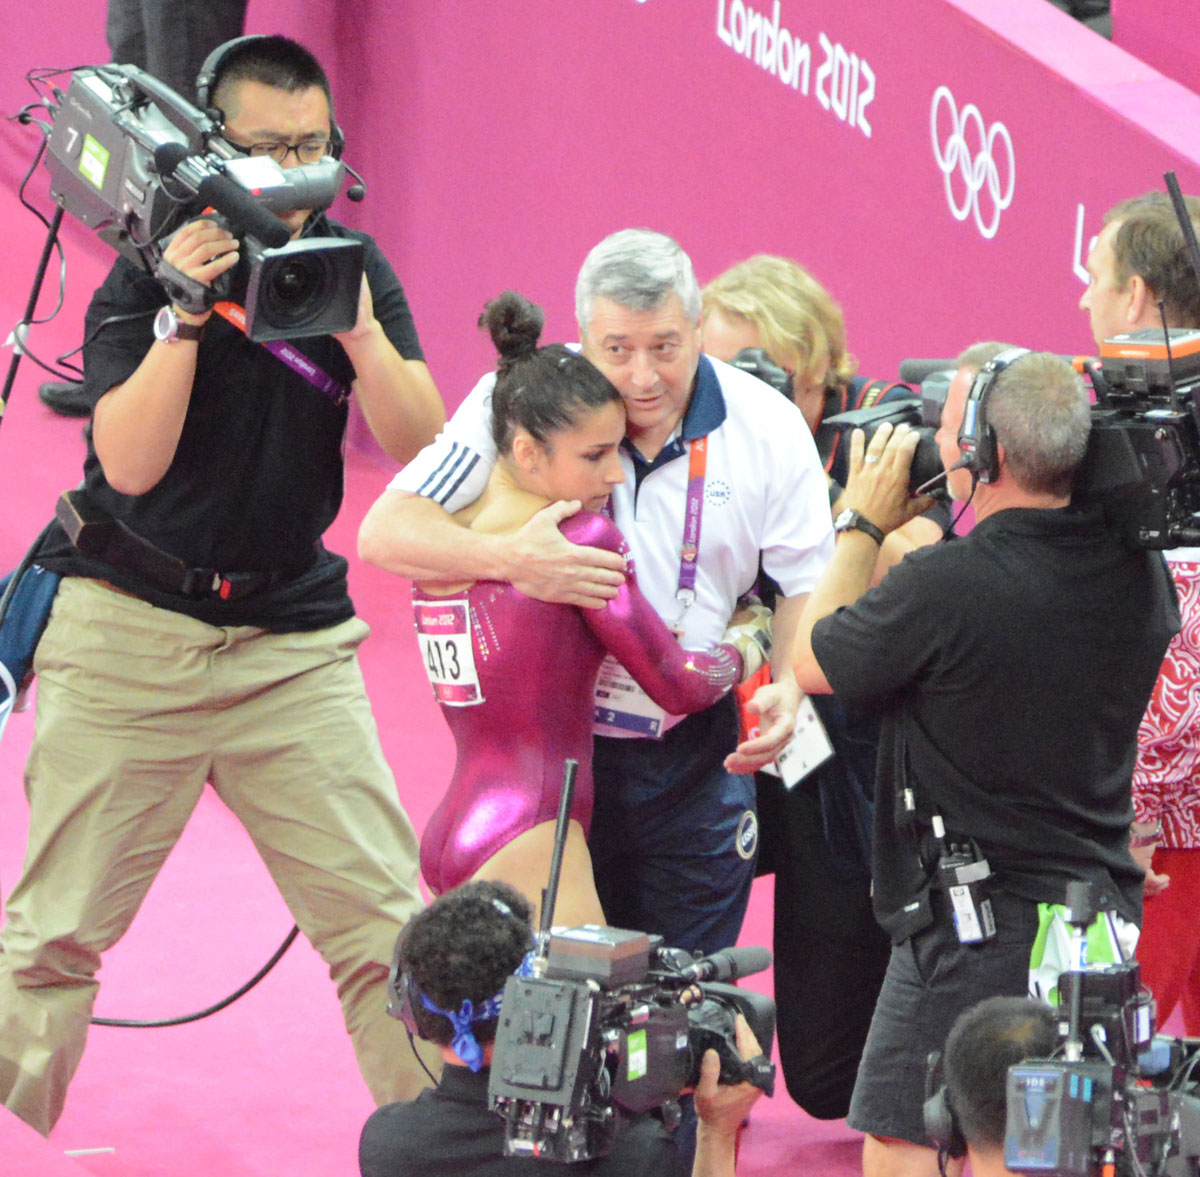 USA gymnist Aly Raisman hugs her coach after completing the vault exercise during the 2012 Summer Olympics in London England. Aly Reisman flips in her floor exercise.